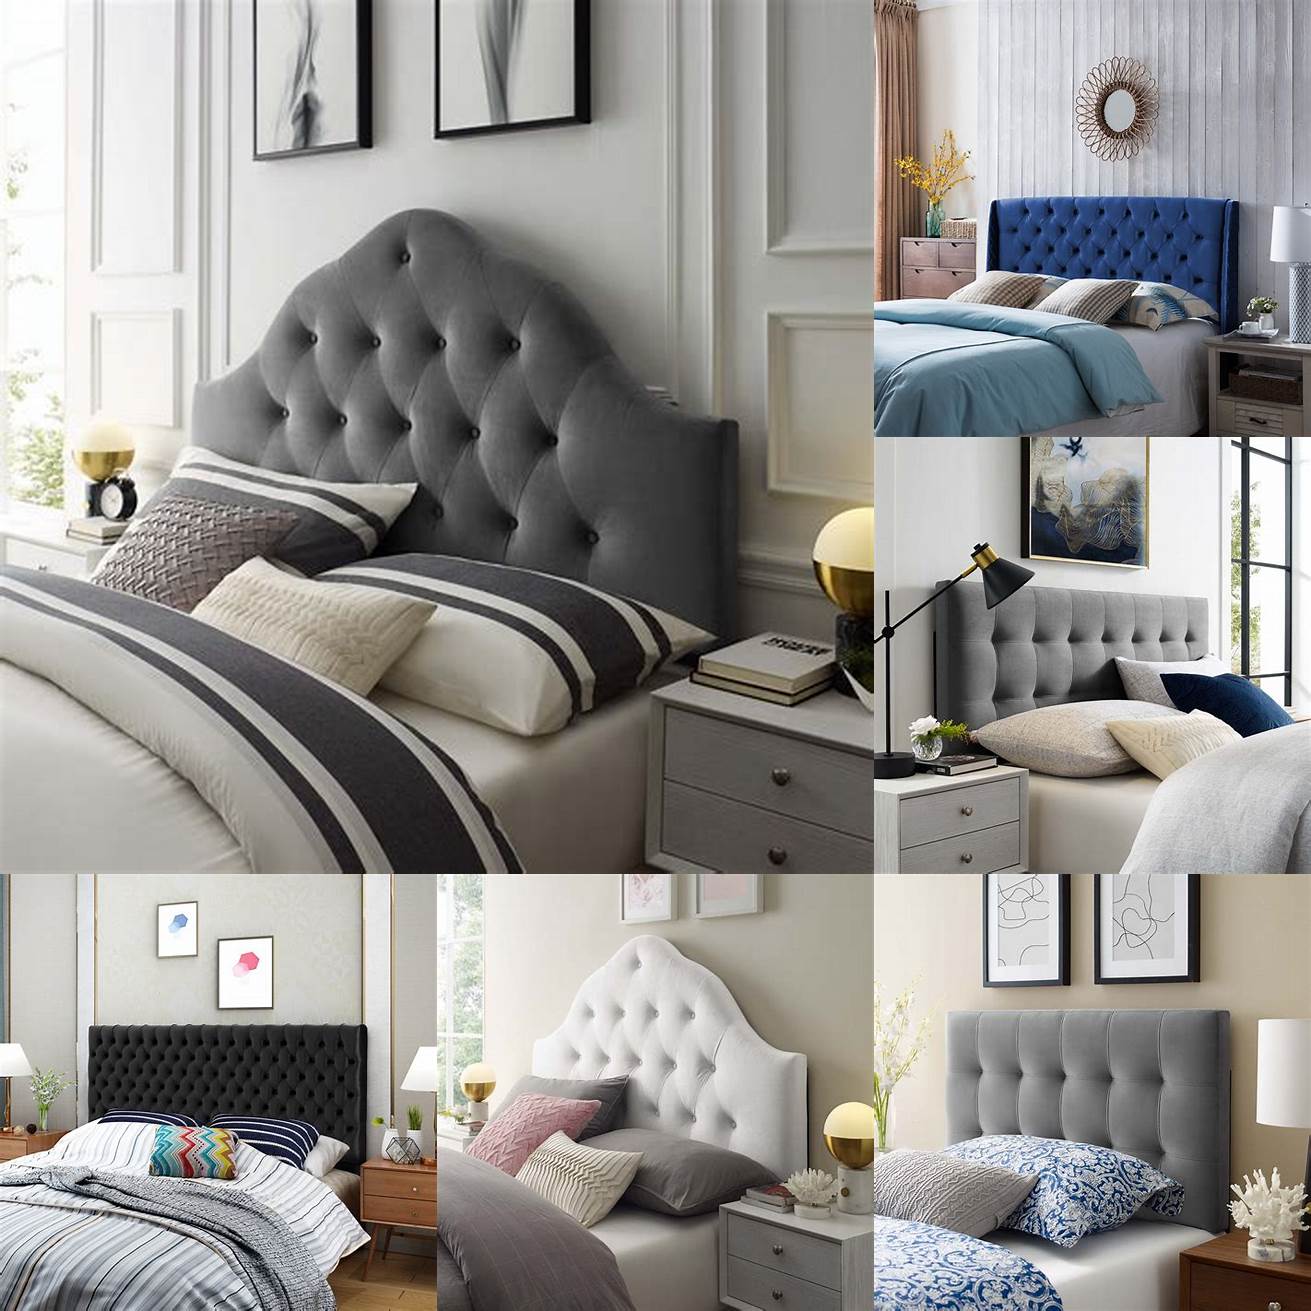 Double bed with a tufted headboard